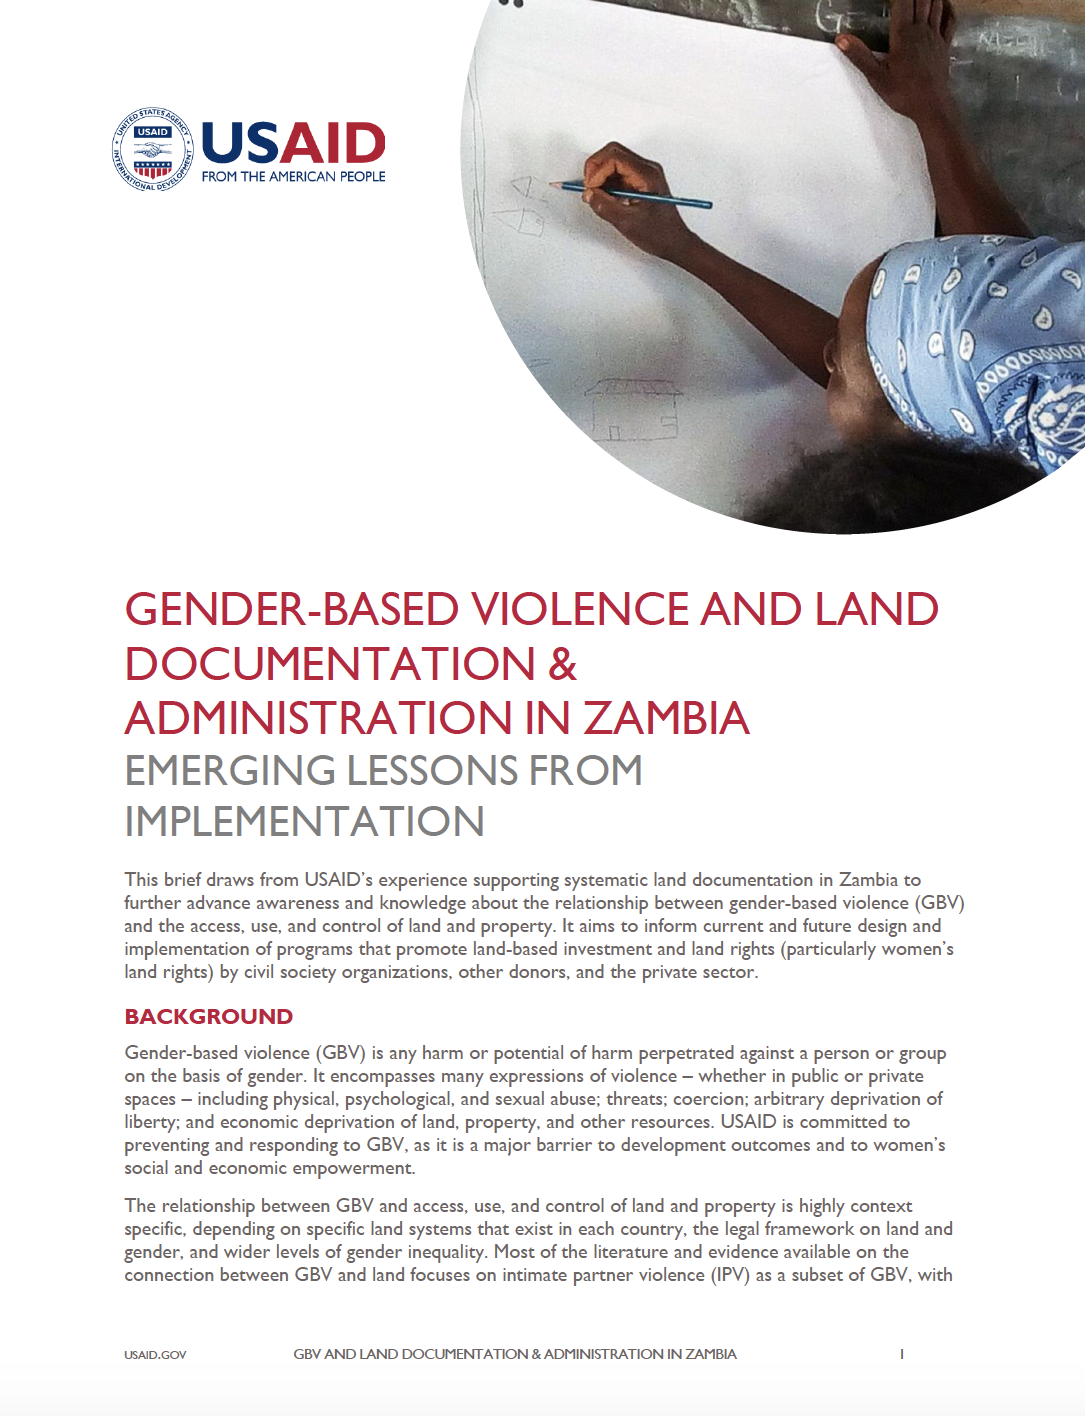 Gender-Based Violence and Land Documentation & Administration in Zambia